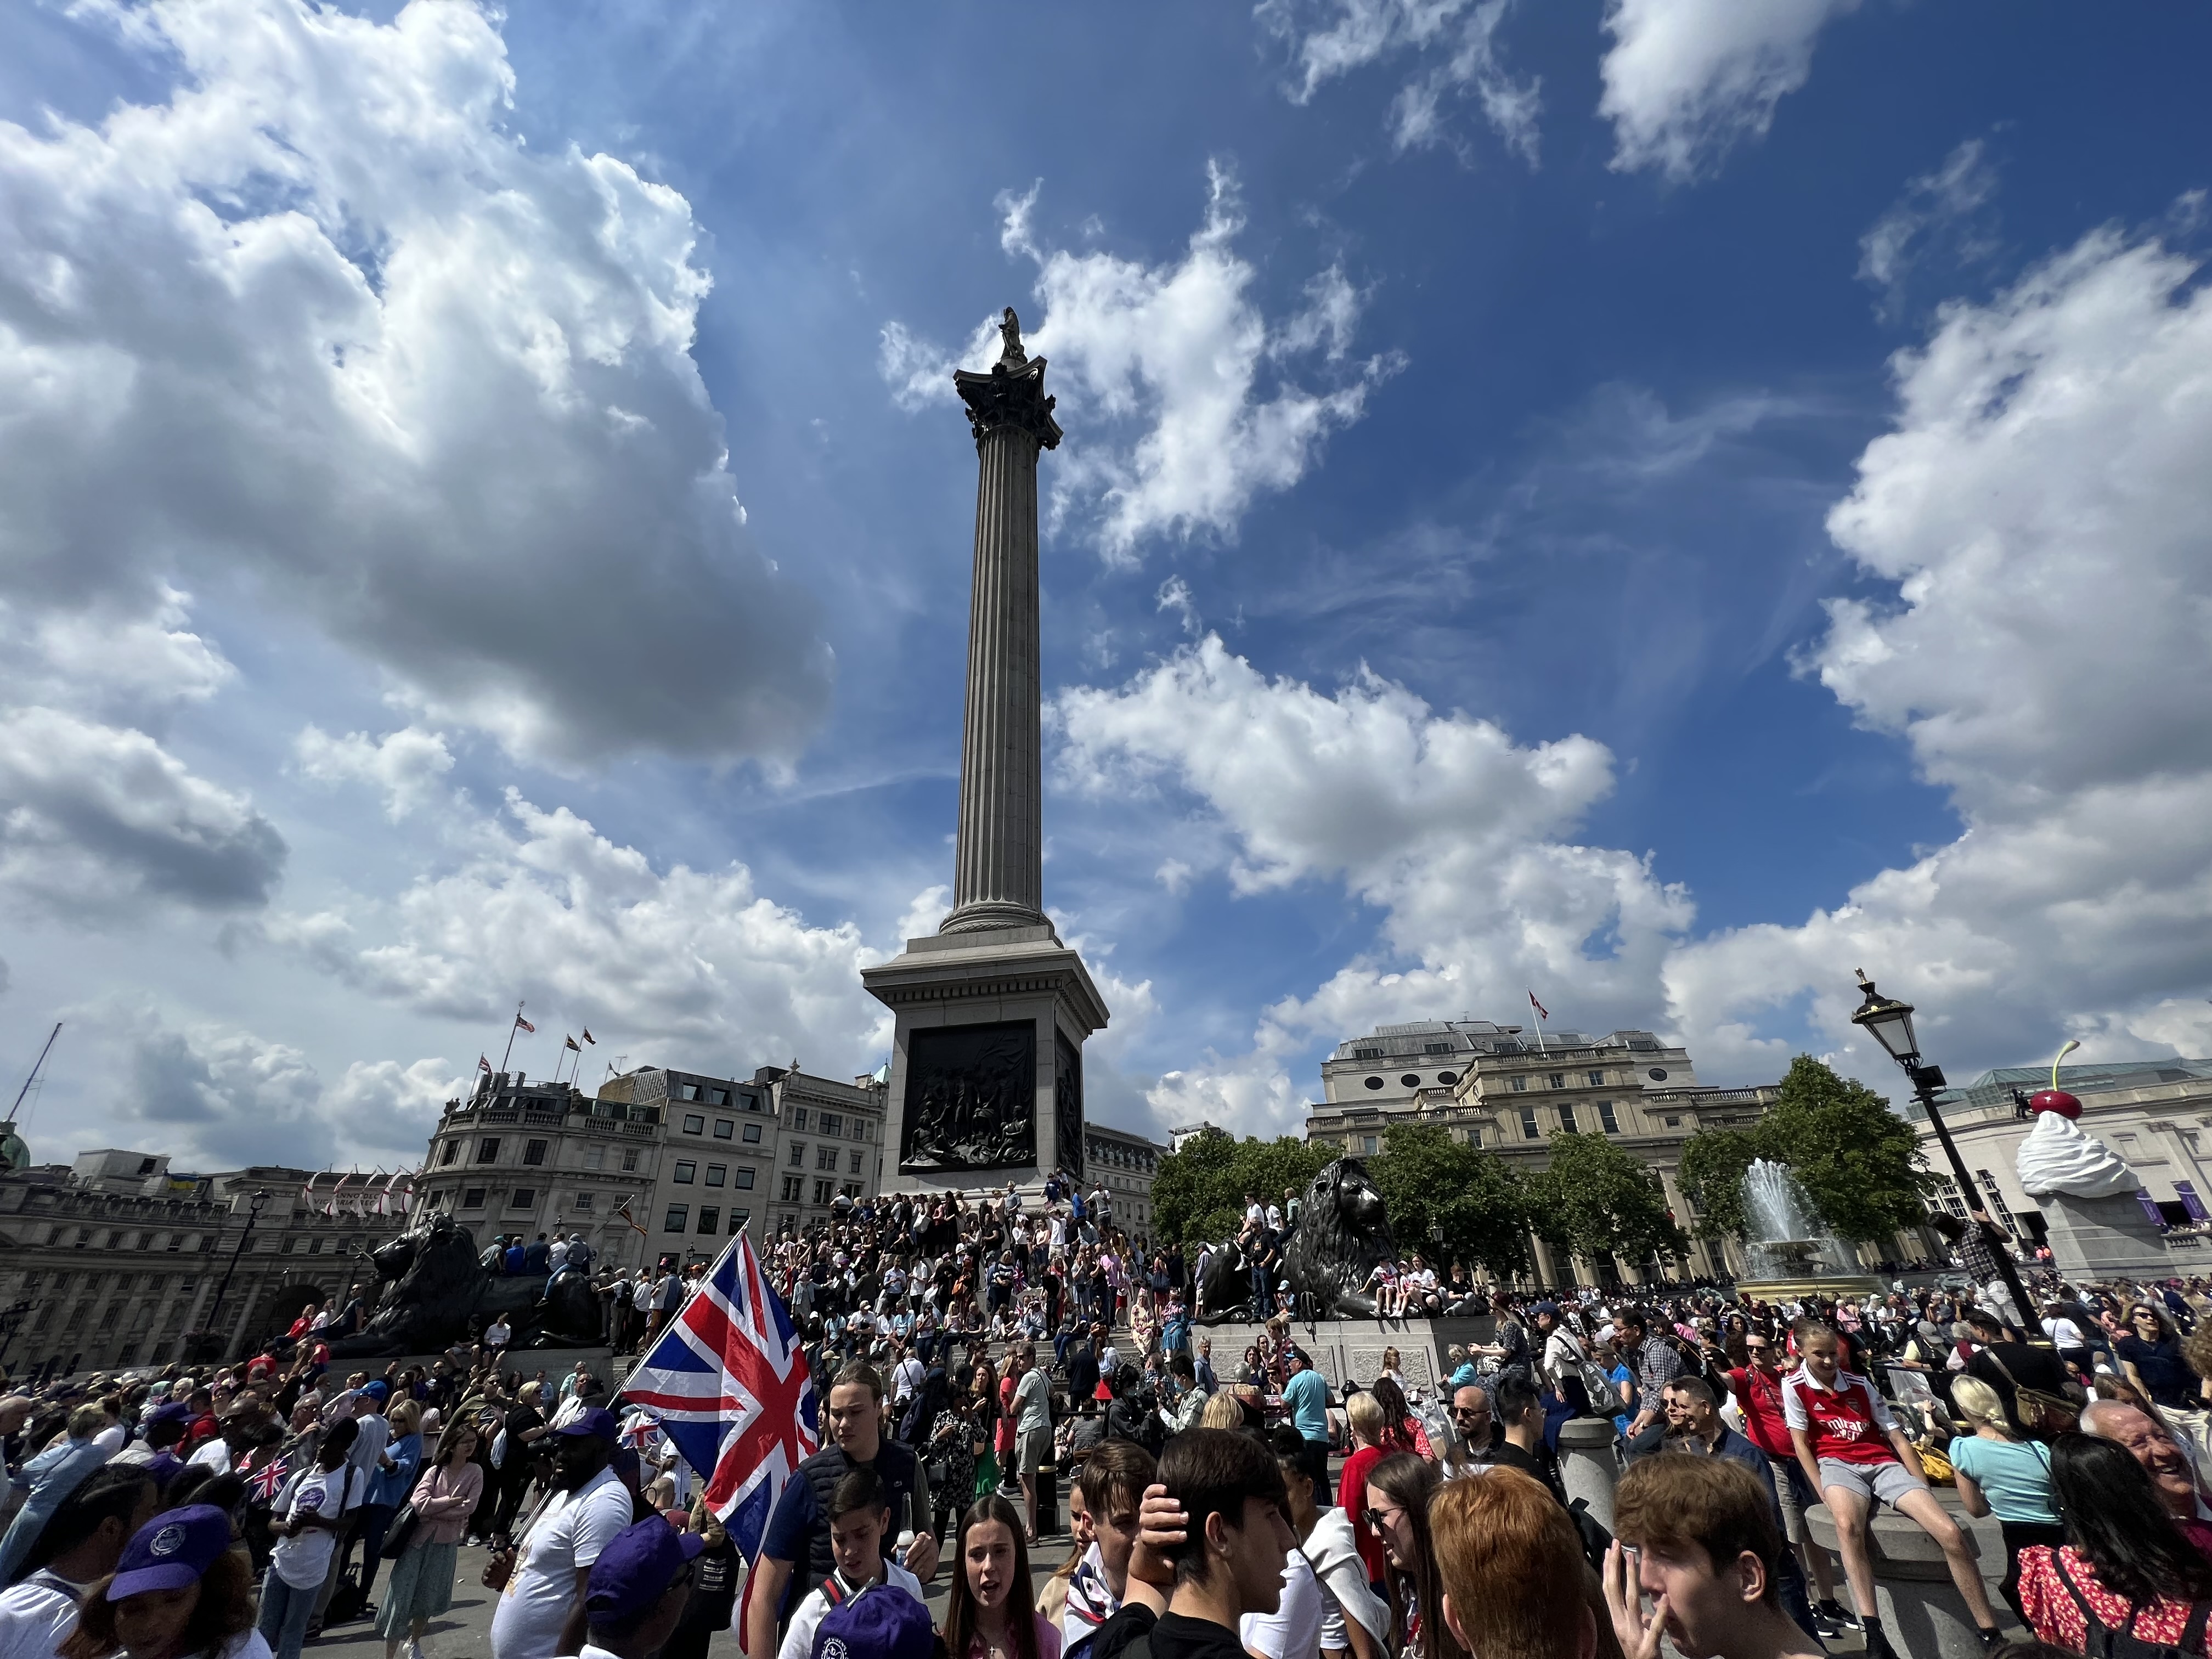 Trafalgar Square in Central London was packed during the Platinum Jubilee 2022